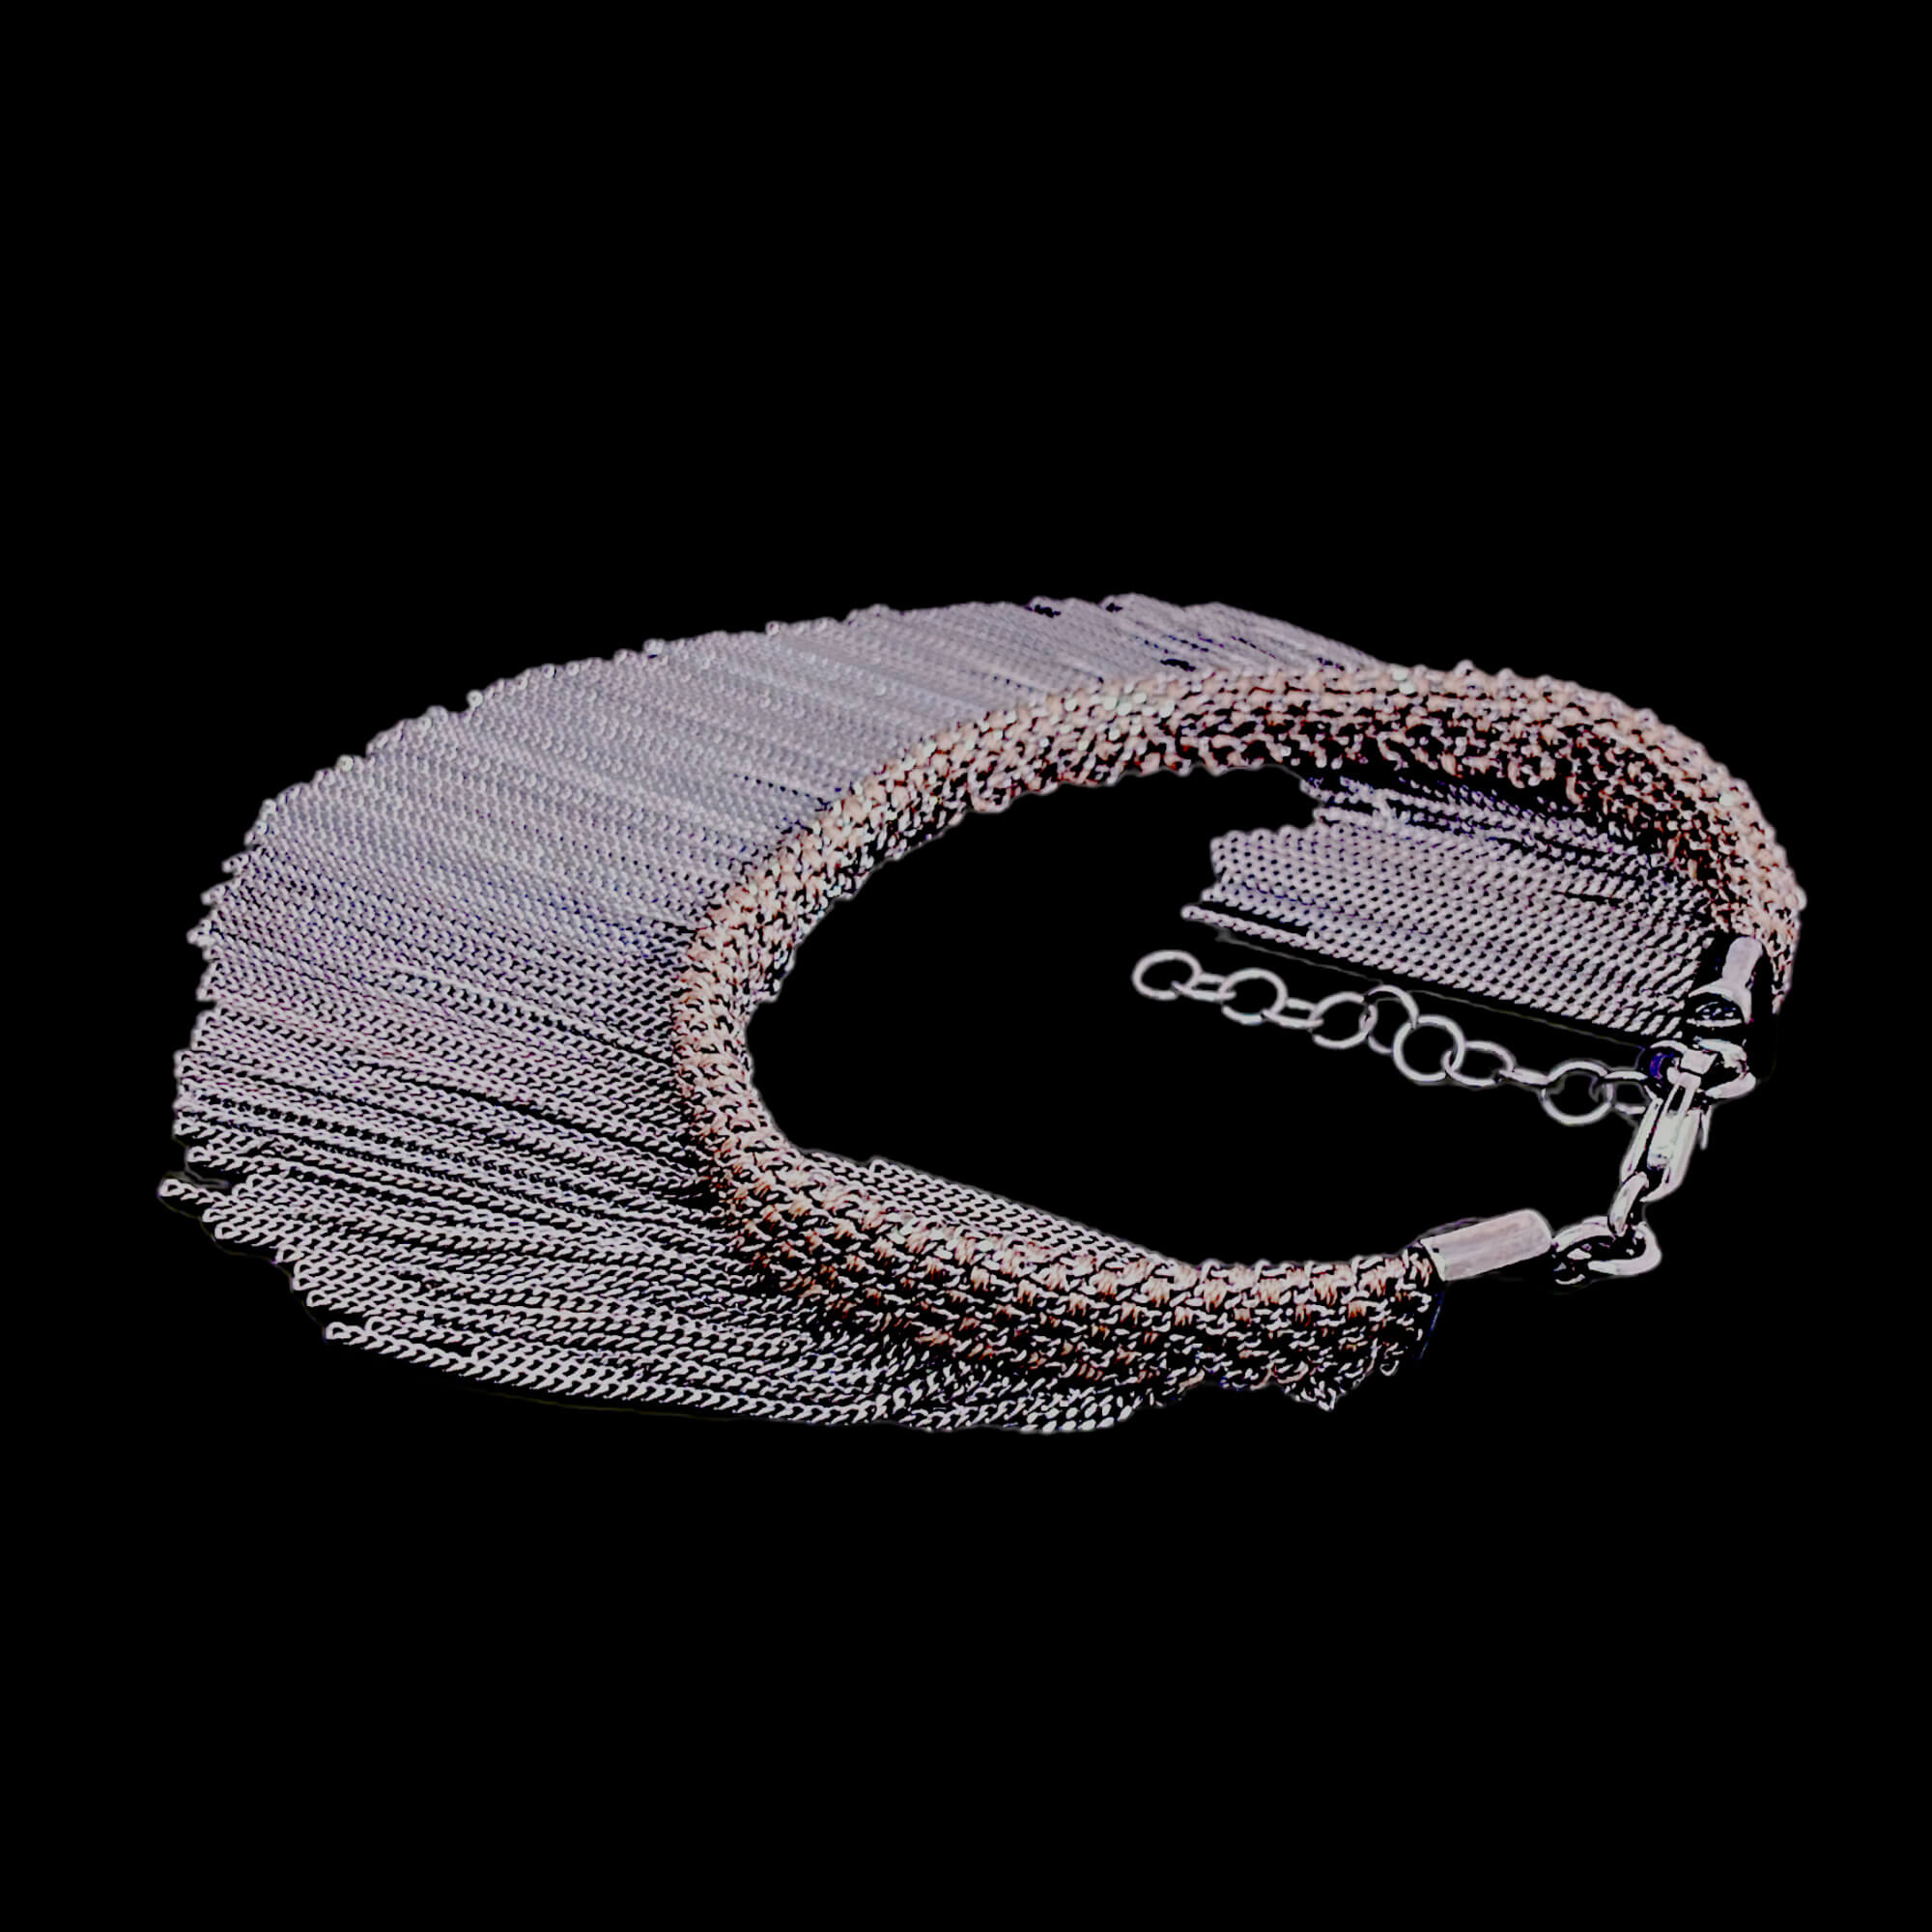 Brown and gray colored bracelet with hanging chains